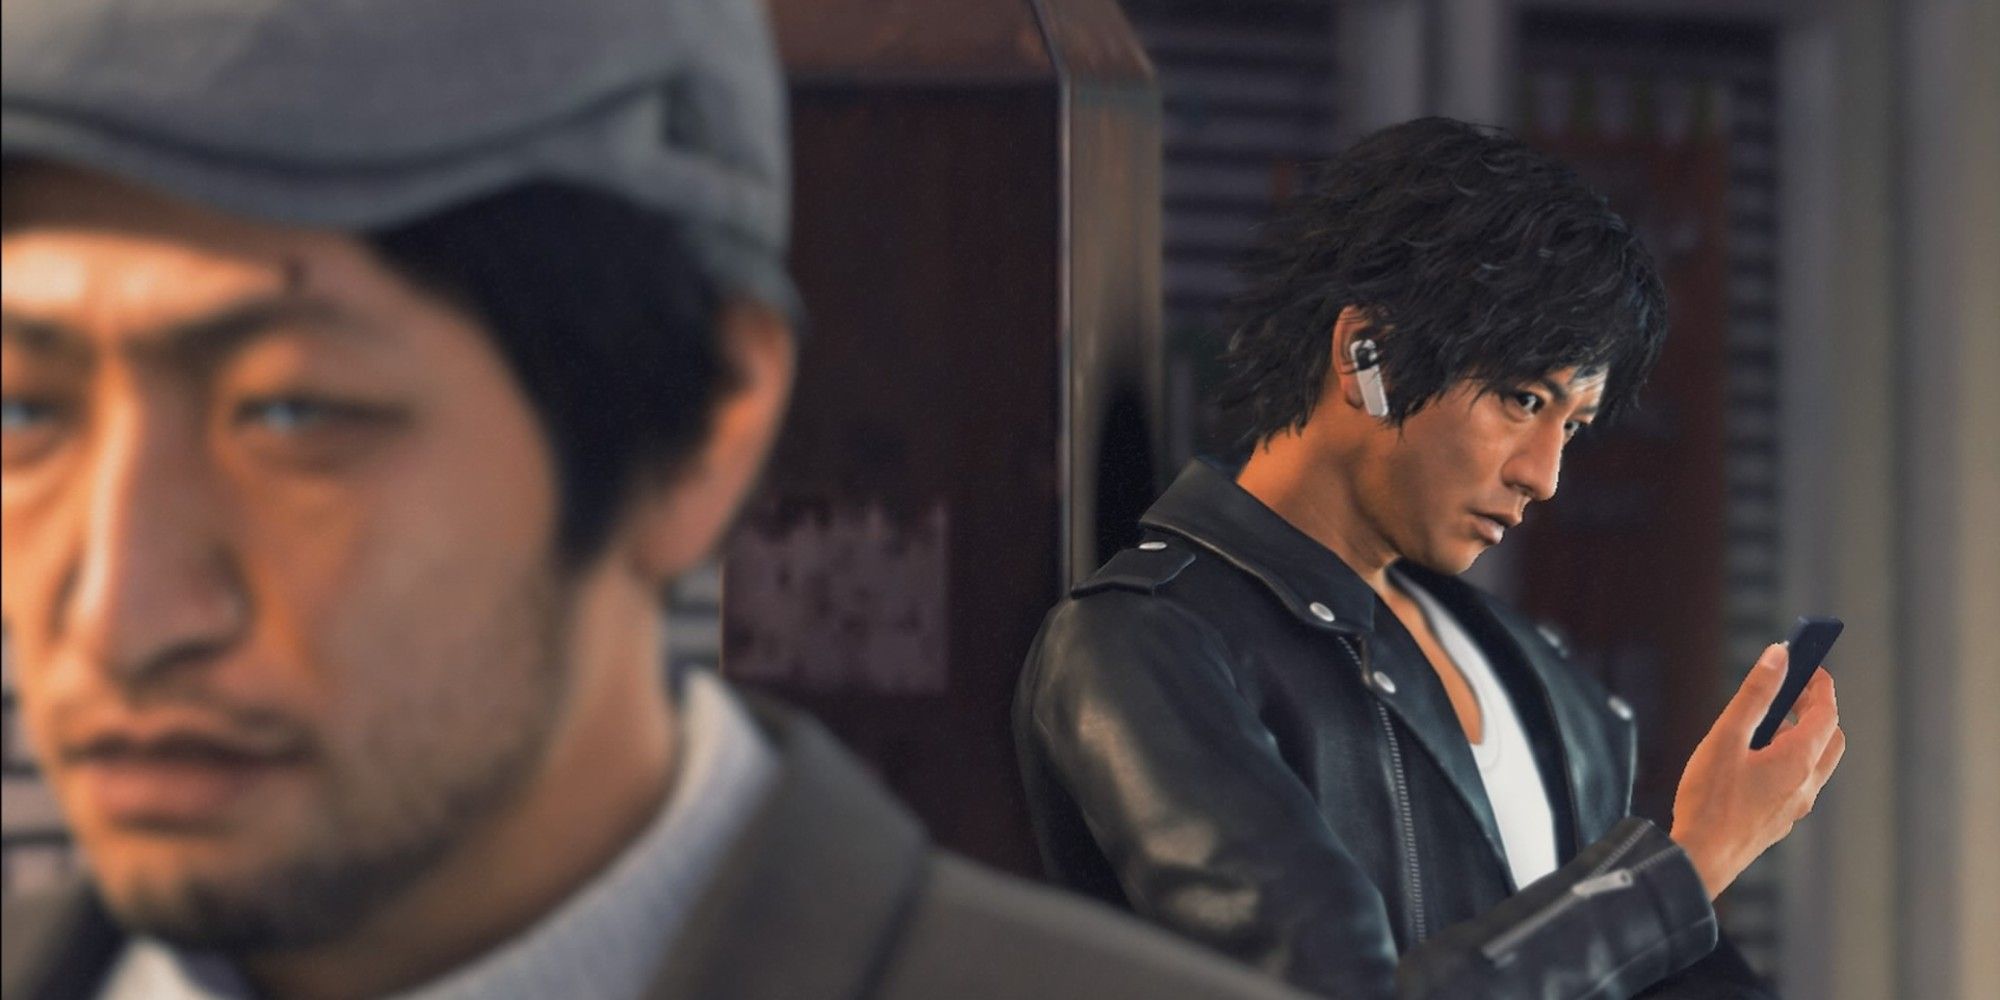 Yagami in Judgment glances up from his phone at a guy he's tailing